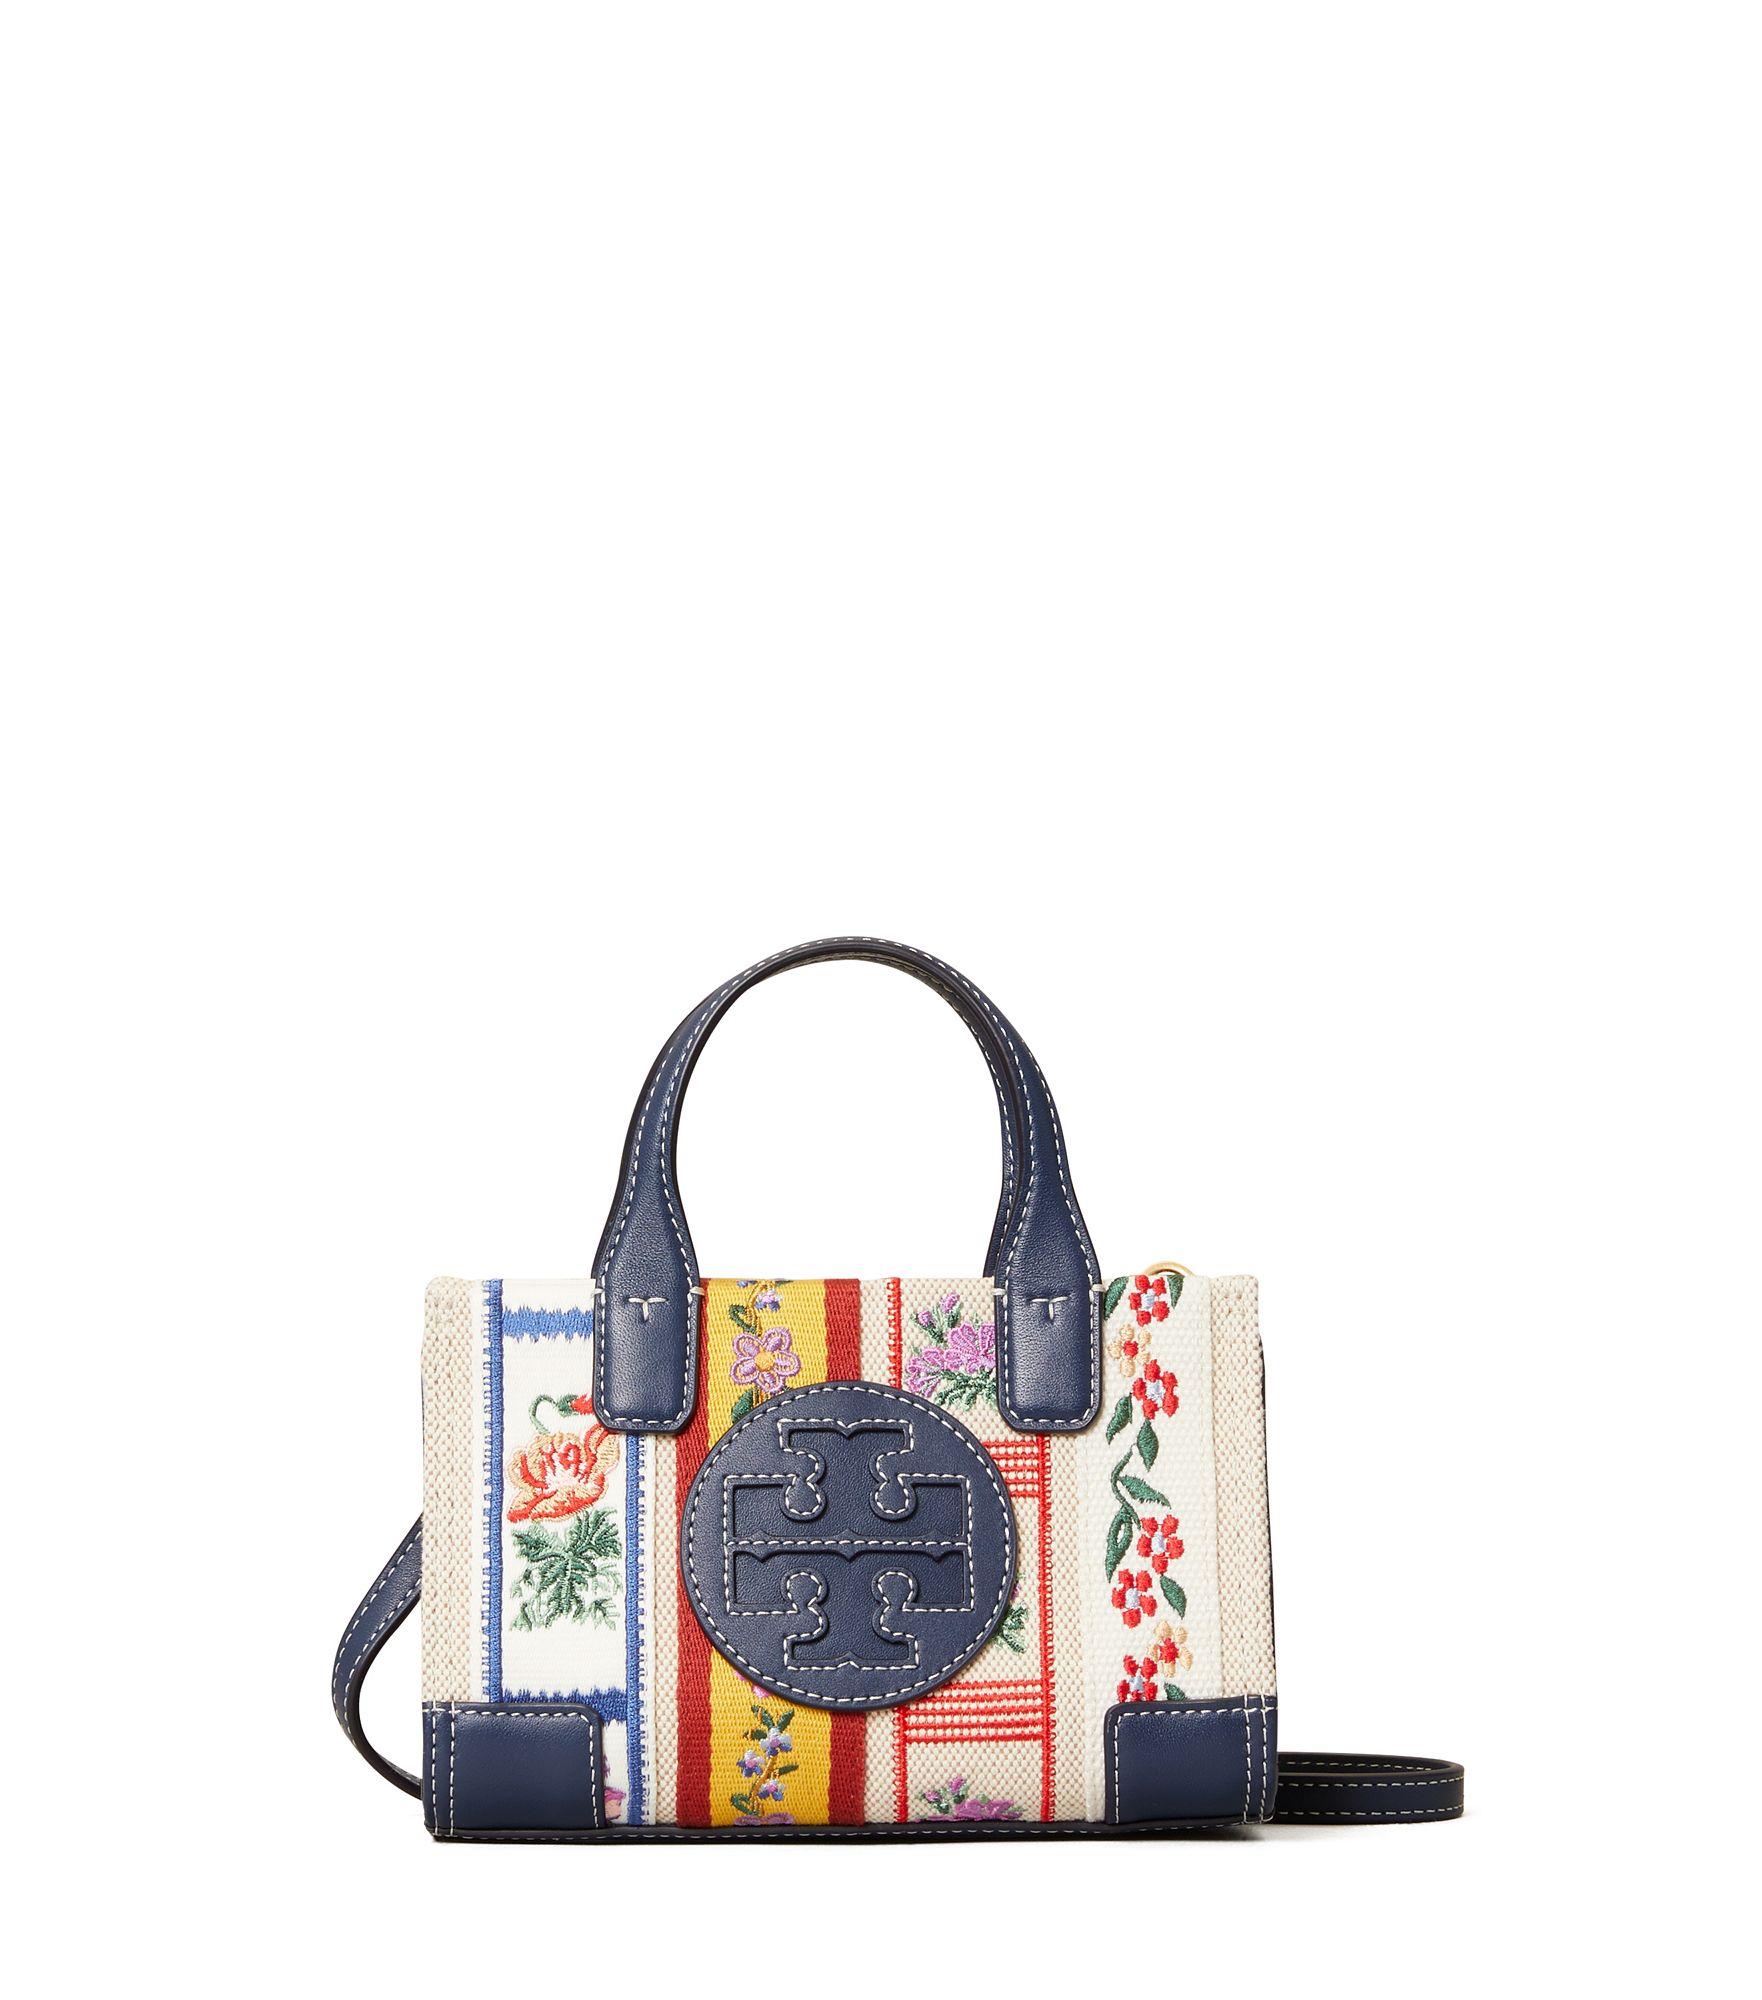 chanel patchwork tote bag